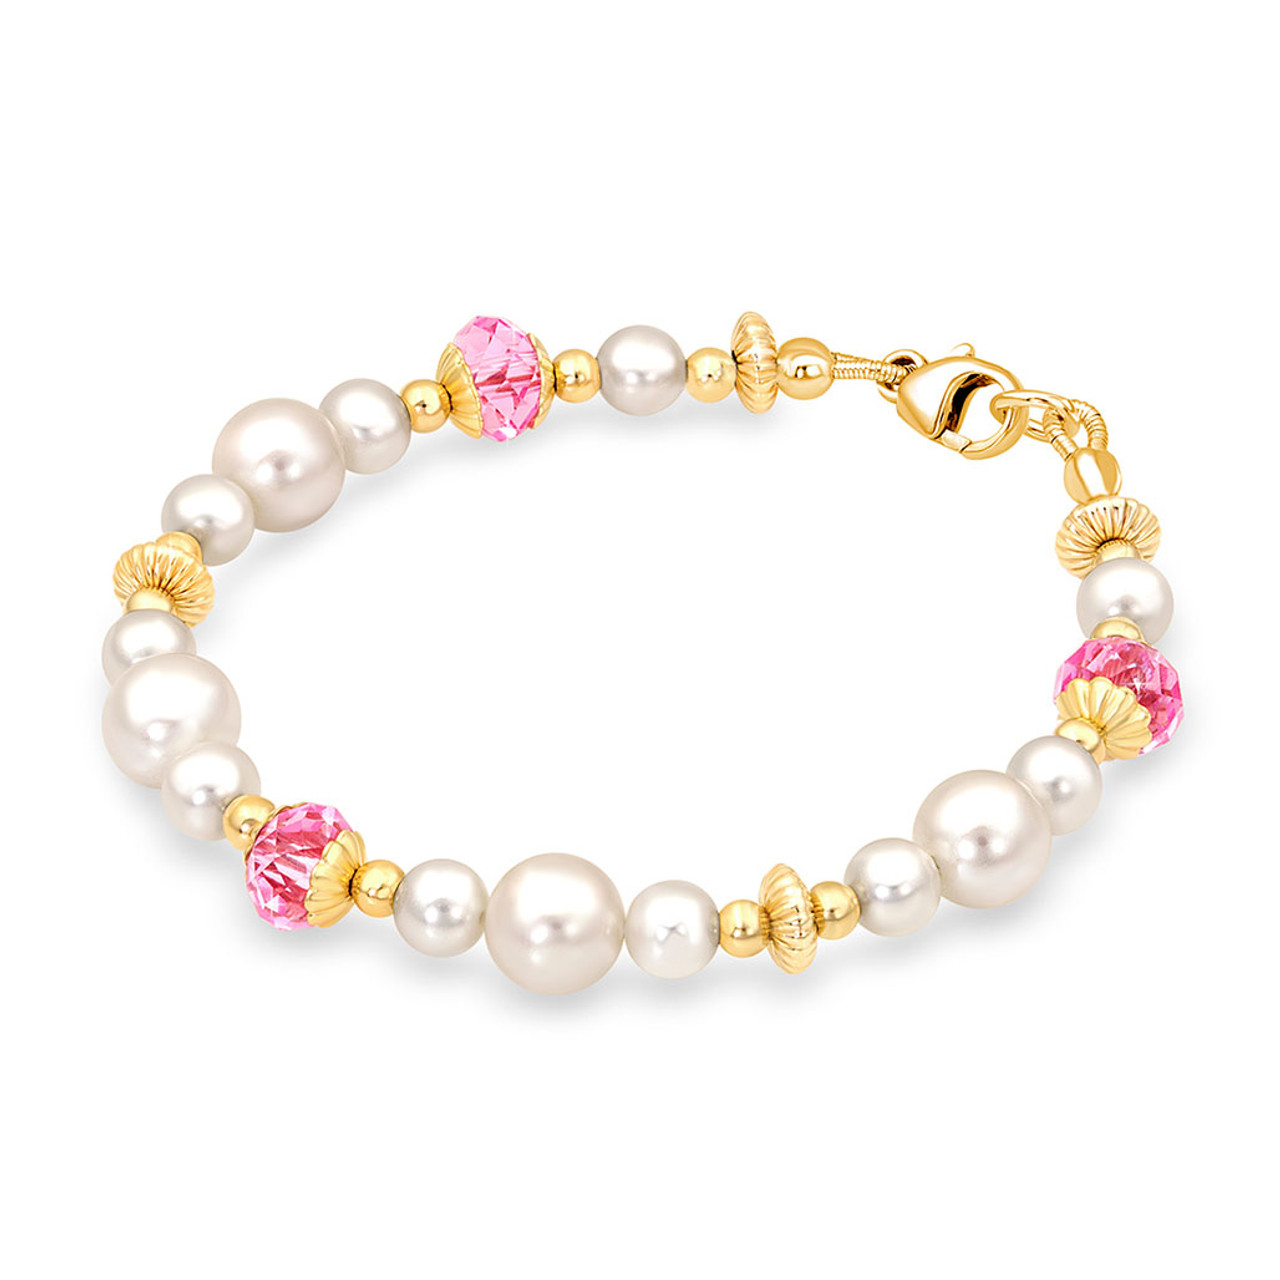 Little Girl Pearl Bracelet - The Pearl Girls, Cultured Pearls